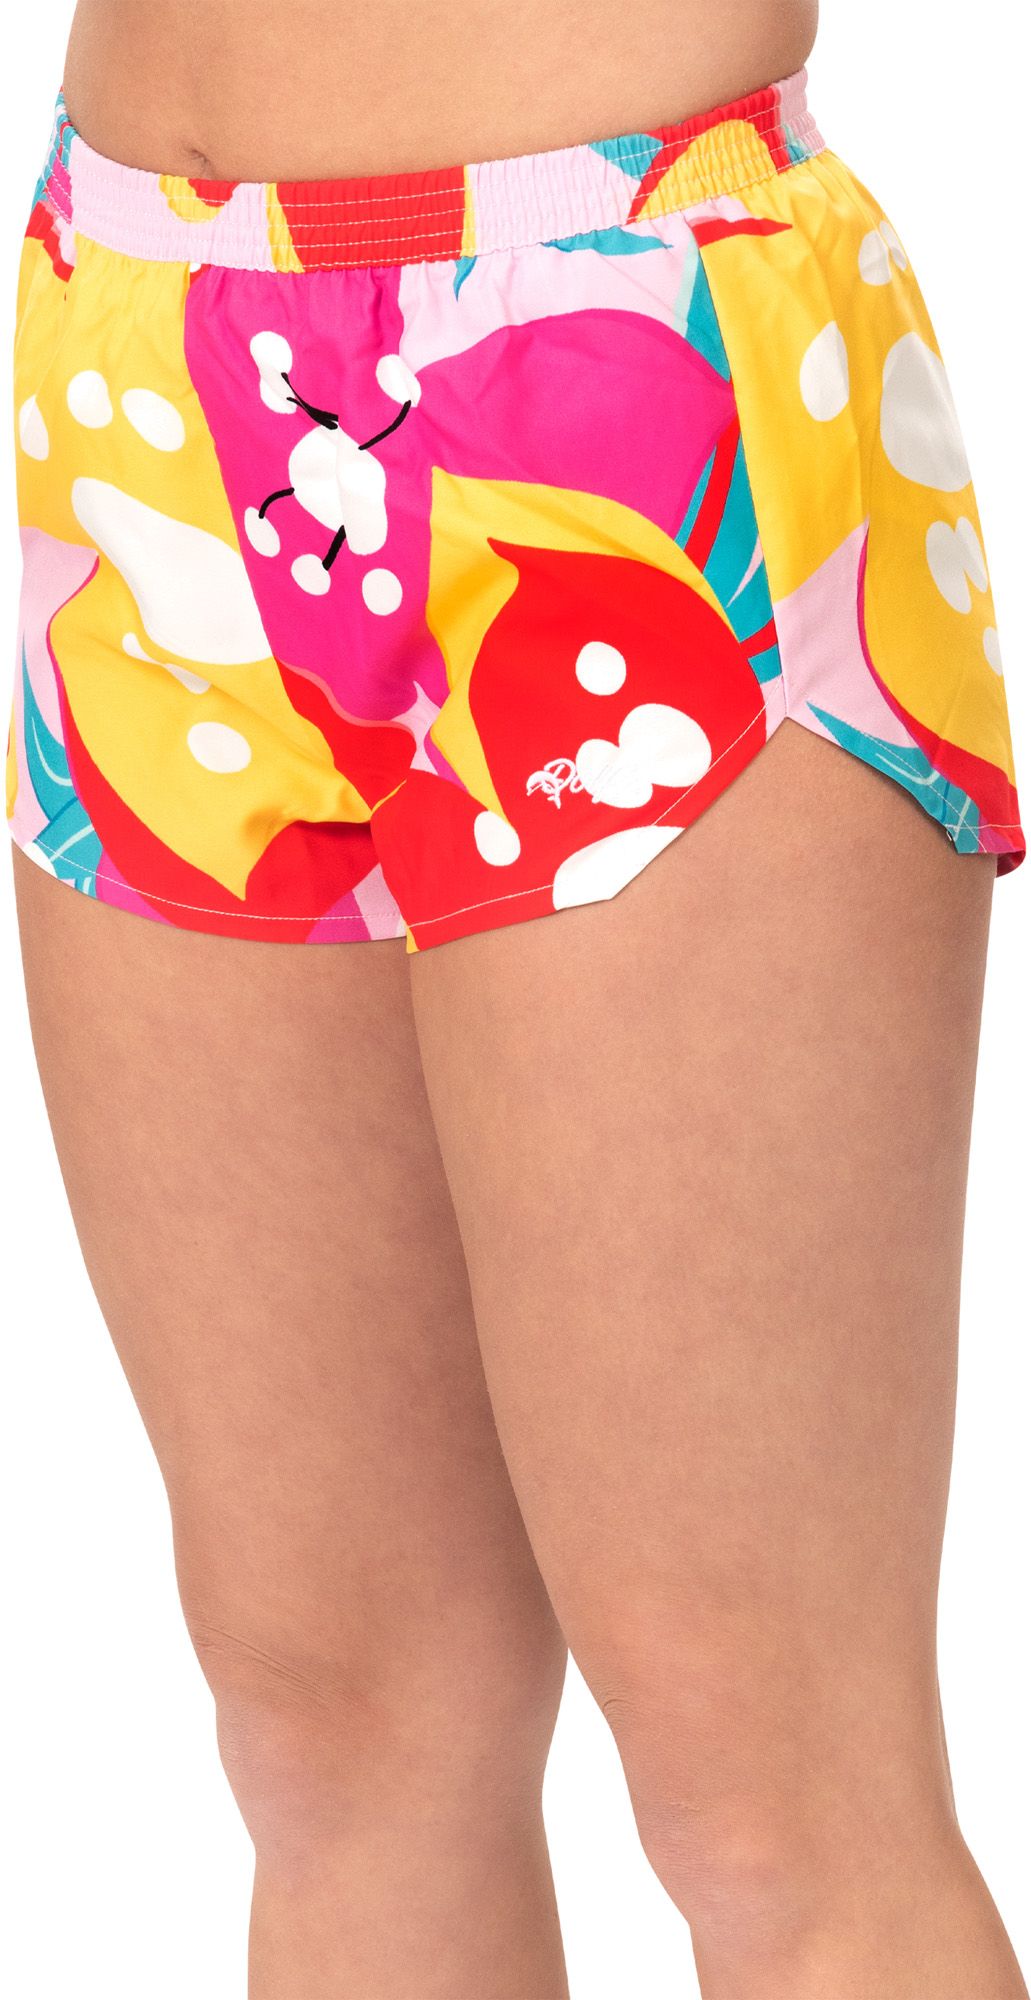 Mid-Rise Running Shorts with Placement Print